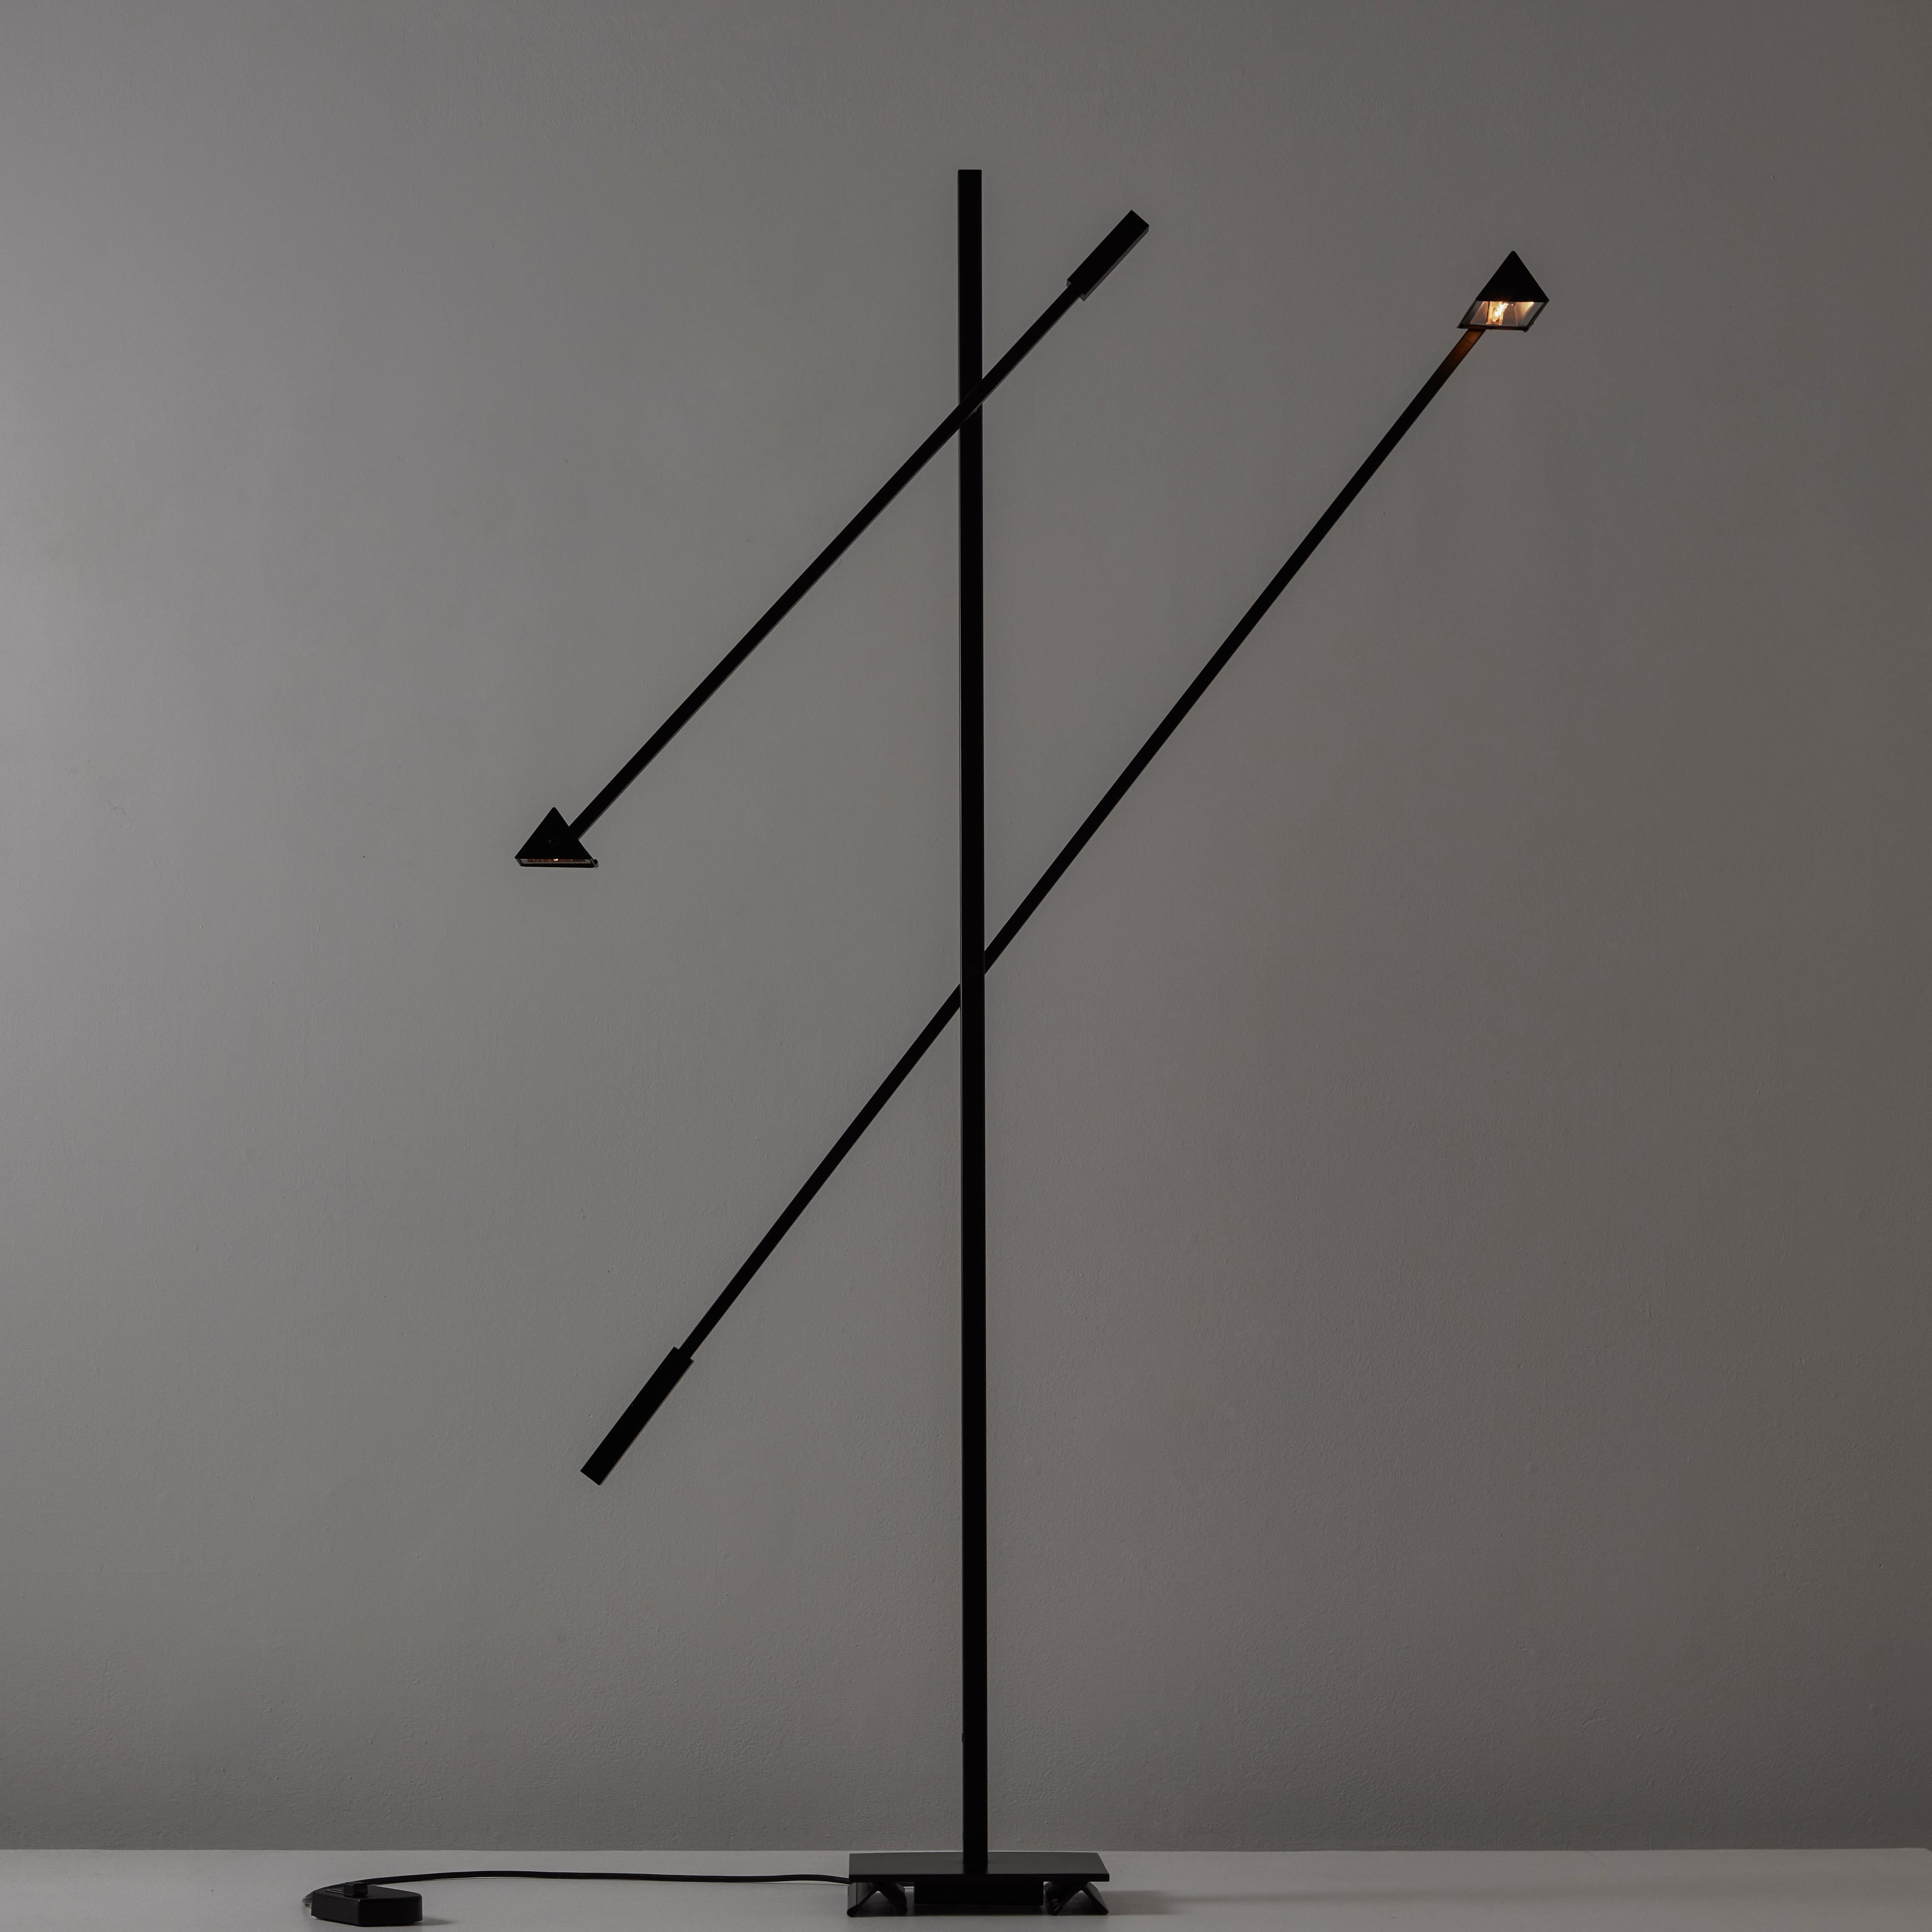 'Mikado' Floor Lamp by Michel Senne for Arlumiere. Designed and manufactured in France, circa the 1970s. A dual armed floor lamp with two traingular shades, all pivotable in arm postioning and shade direction. Both arms can be moved on a parallel